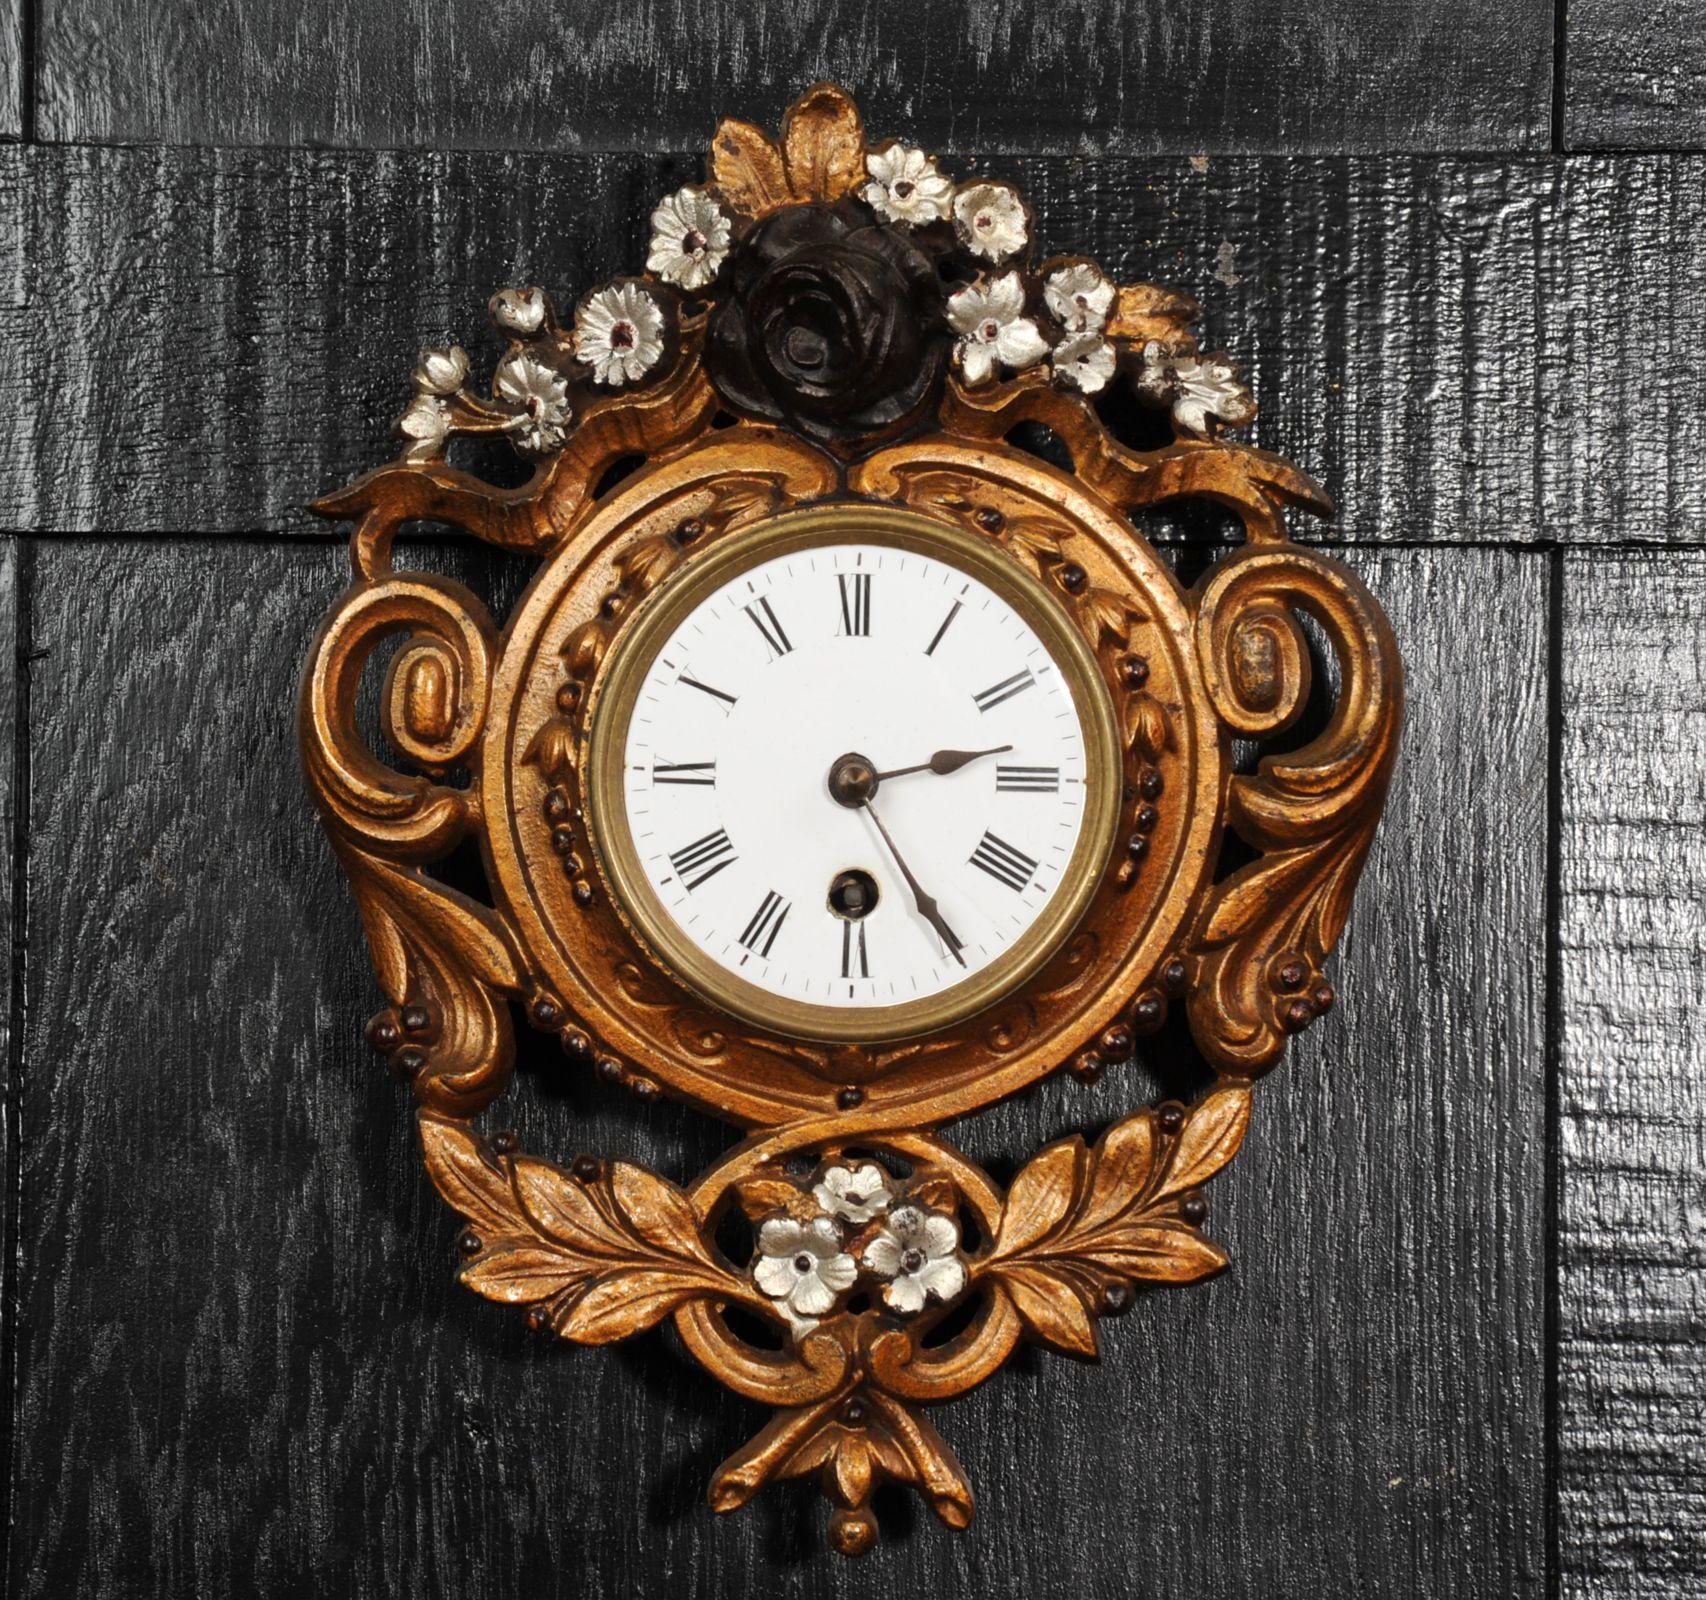 A charming antique French wall clock by the famous maker Japy Freres. Beautifully modelled with leafy scrolls and flowers and painted with gold lacquer with the flowers picked out in silver and black. The lacquer has mellowed and faded beautifully